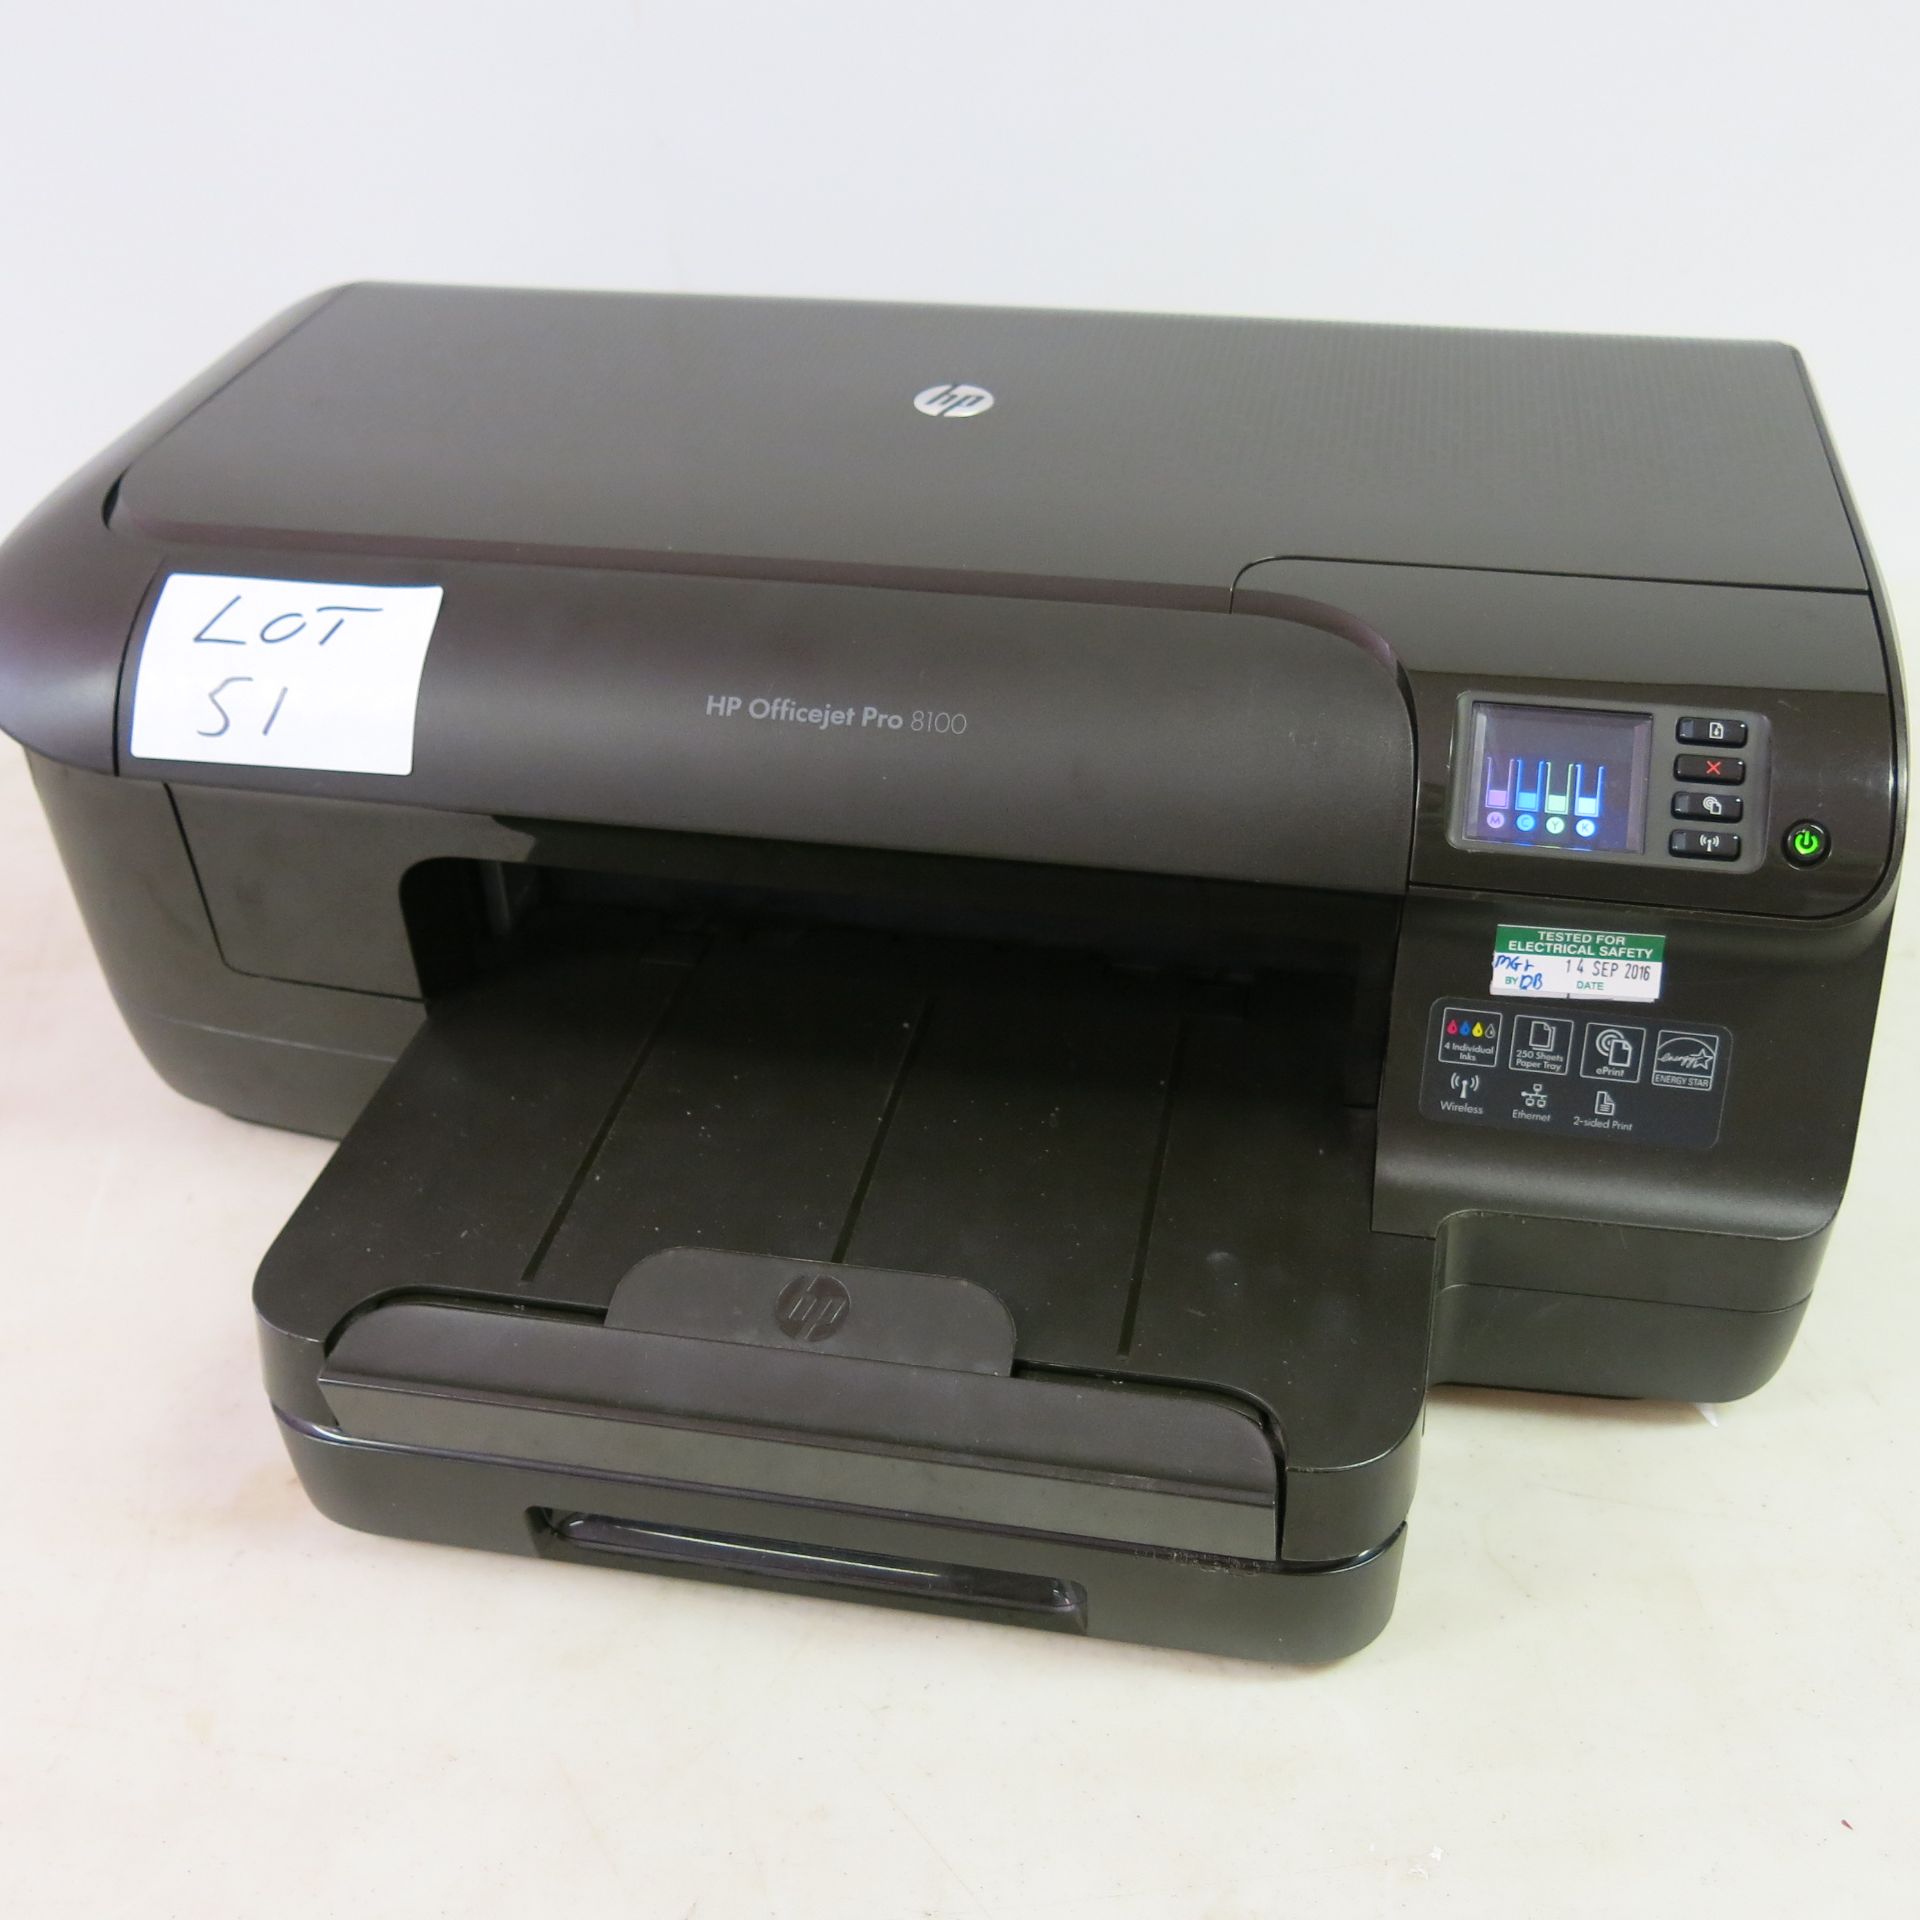 HP OfficeJet Pro 8100 with Power Supply. Comes with Complete Set of Ink Cartridges